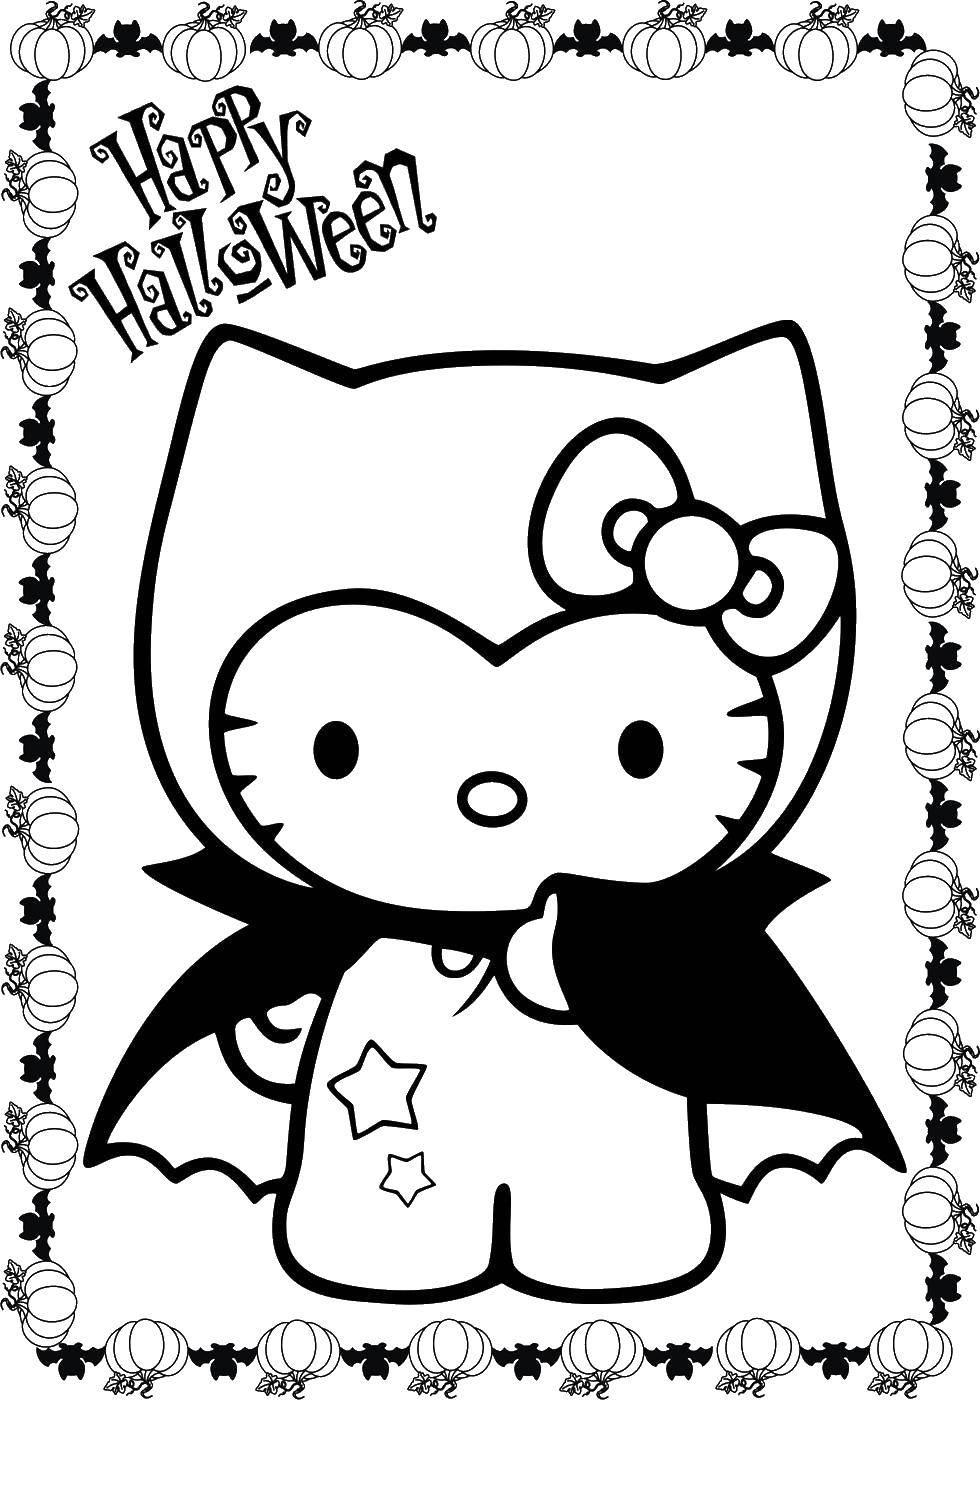 Coloring Kitty and Halloween. Category Hello Kitty. Tags:  Hello Kitty.